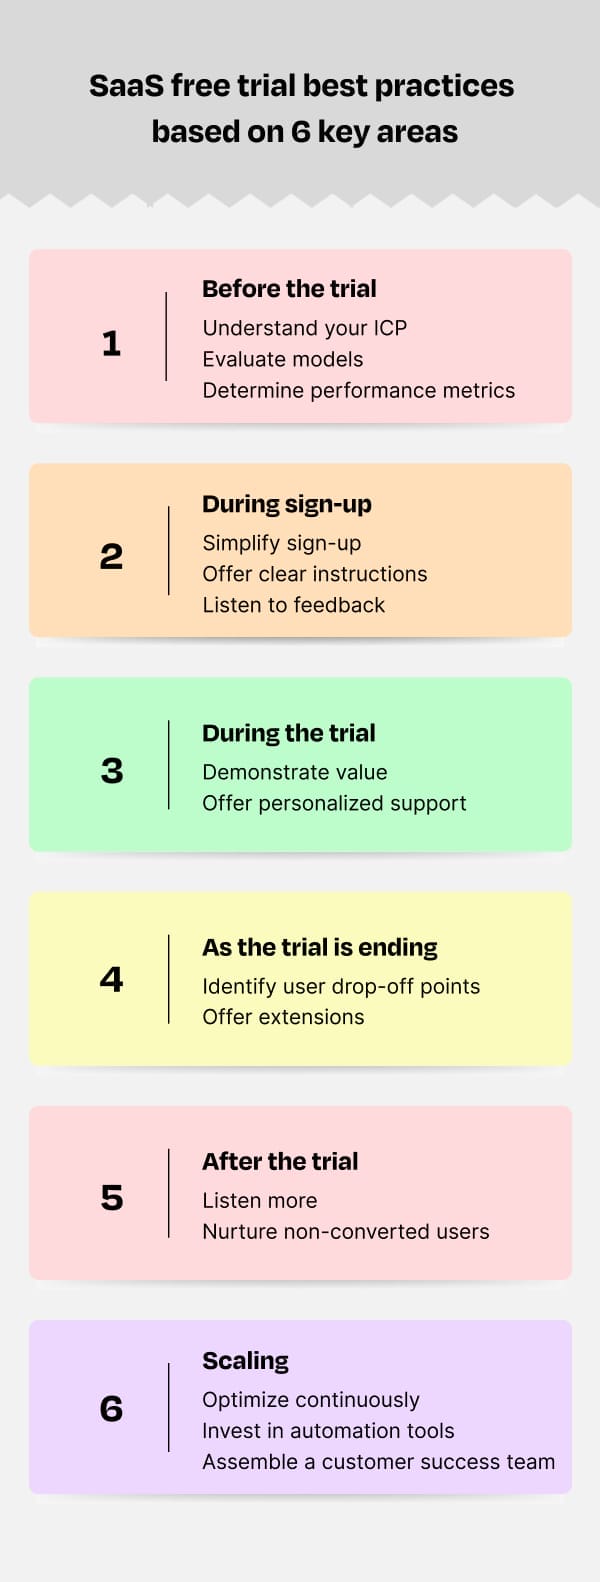 The infographic representation of SaaS Free Trial Best Practices in the PLG Model